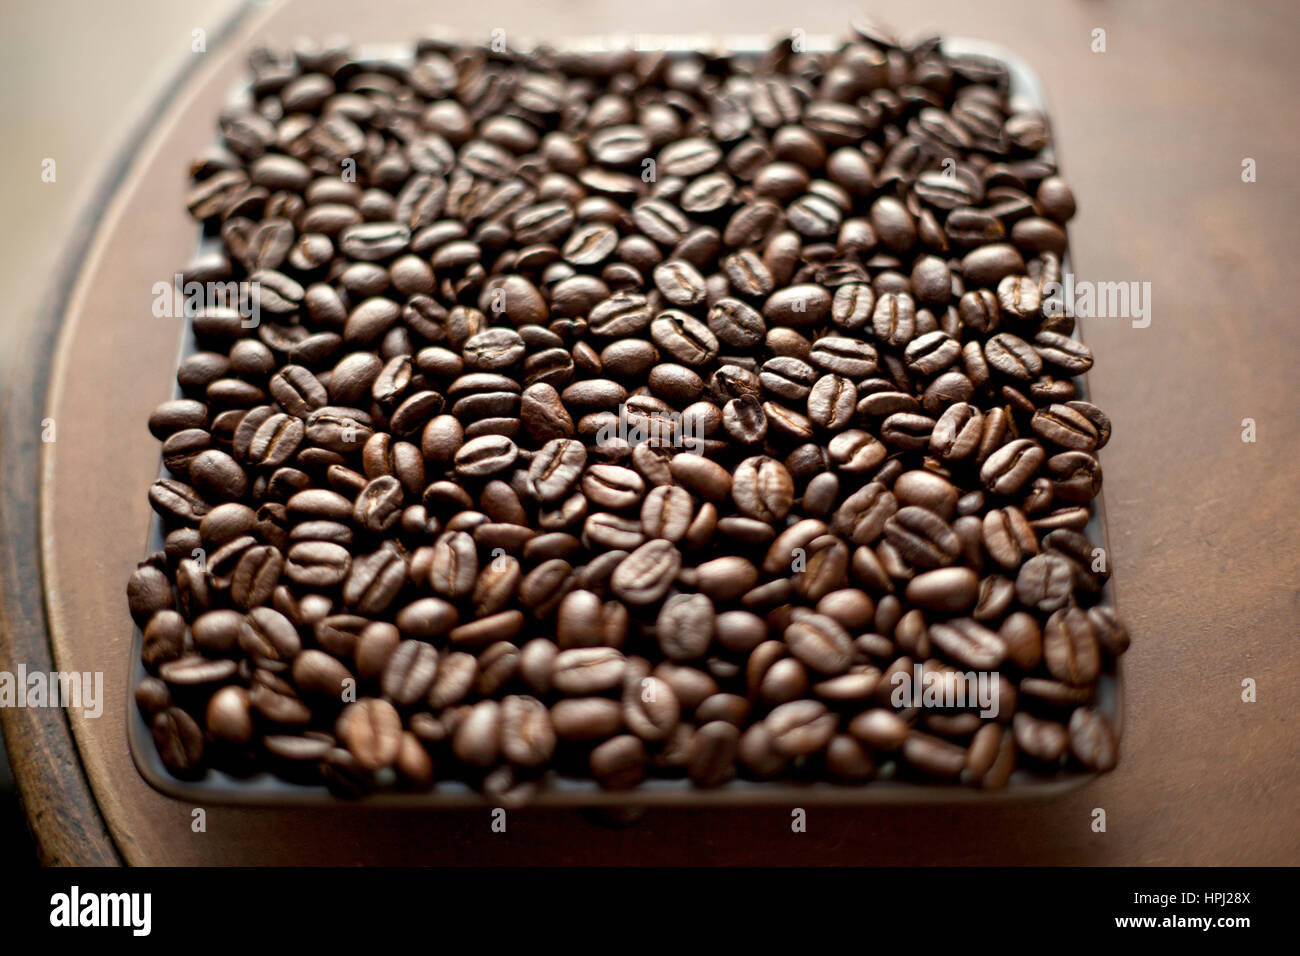 Organic, fresh roasted coffee beans filling a shallow square dish Stock Photo